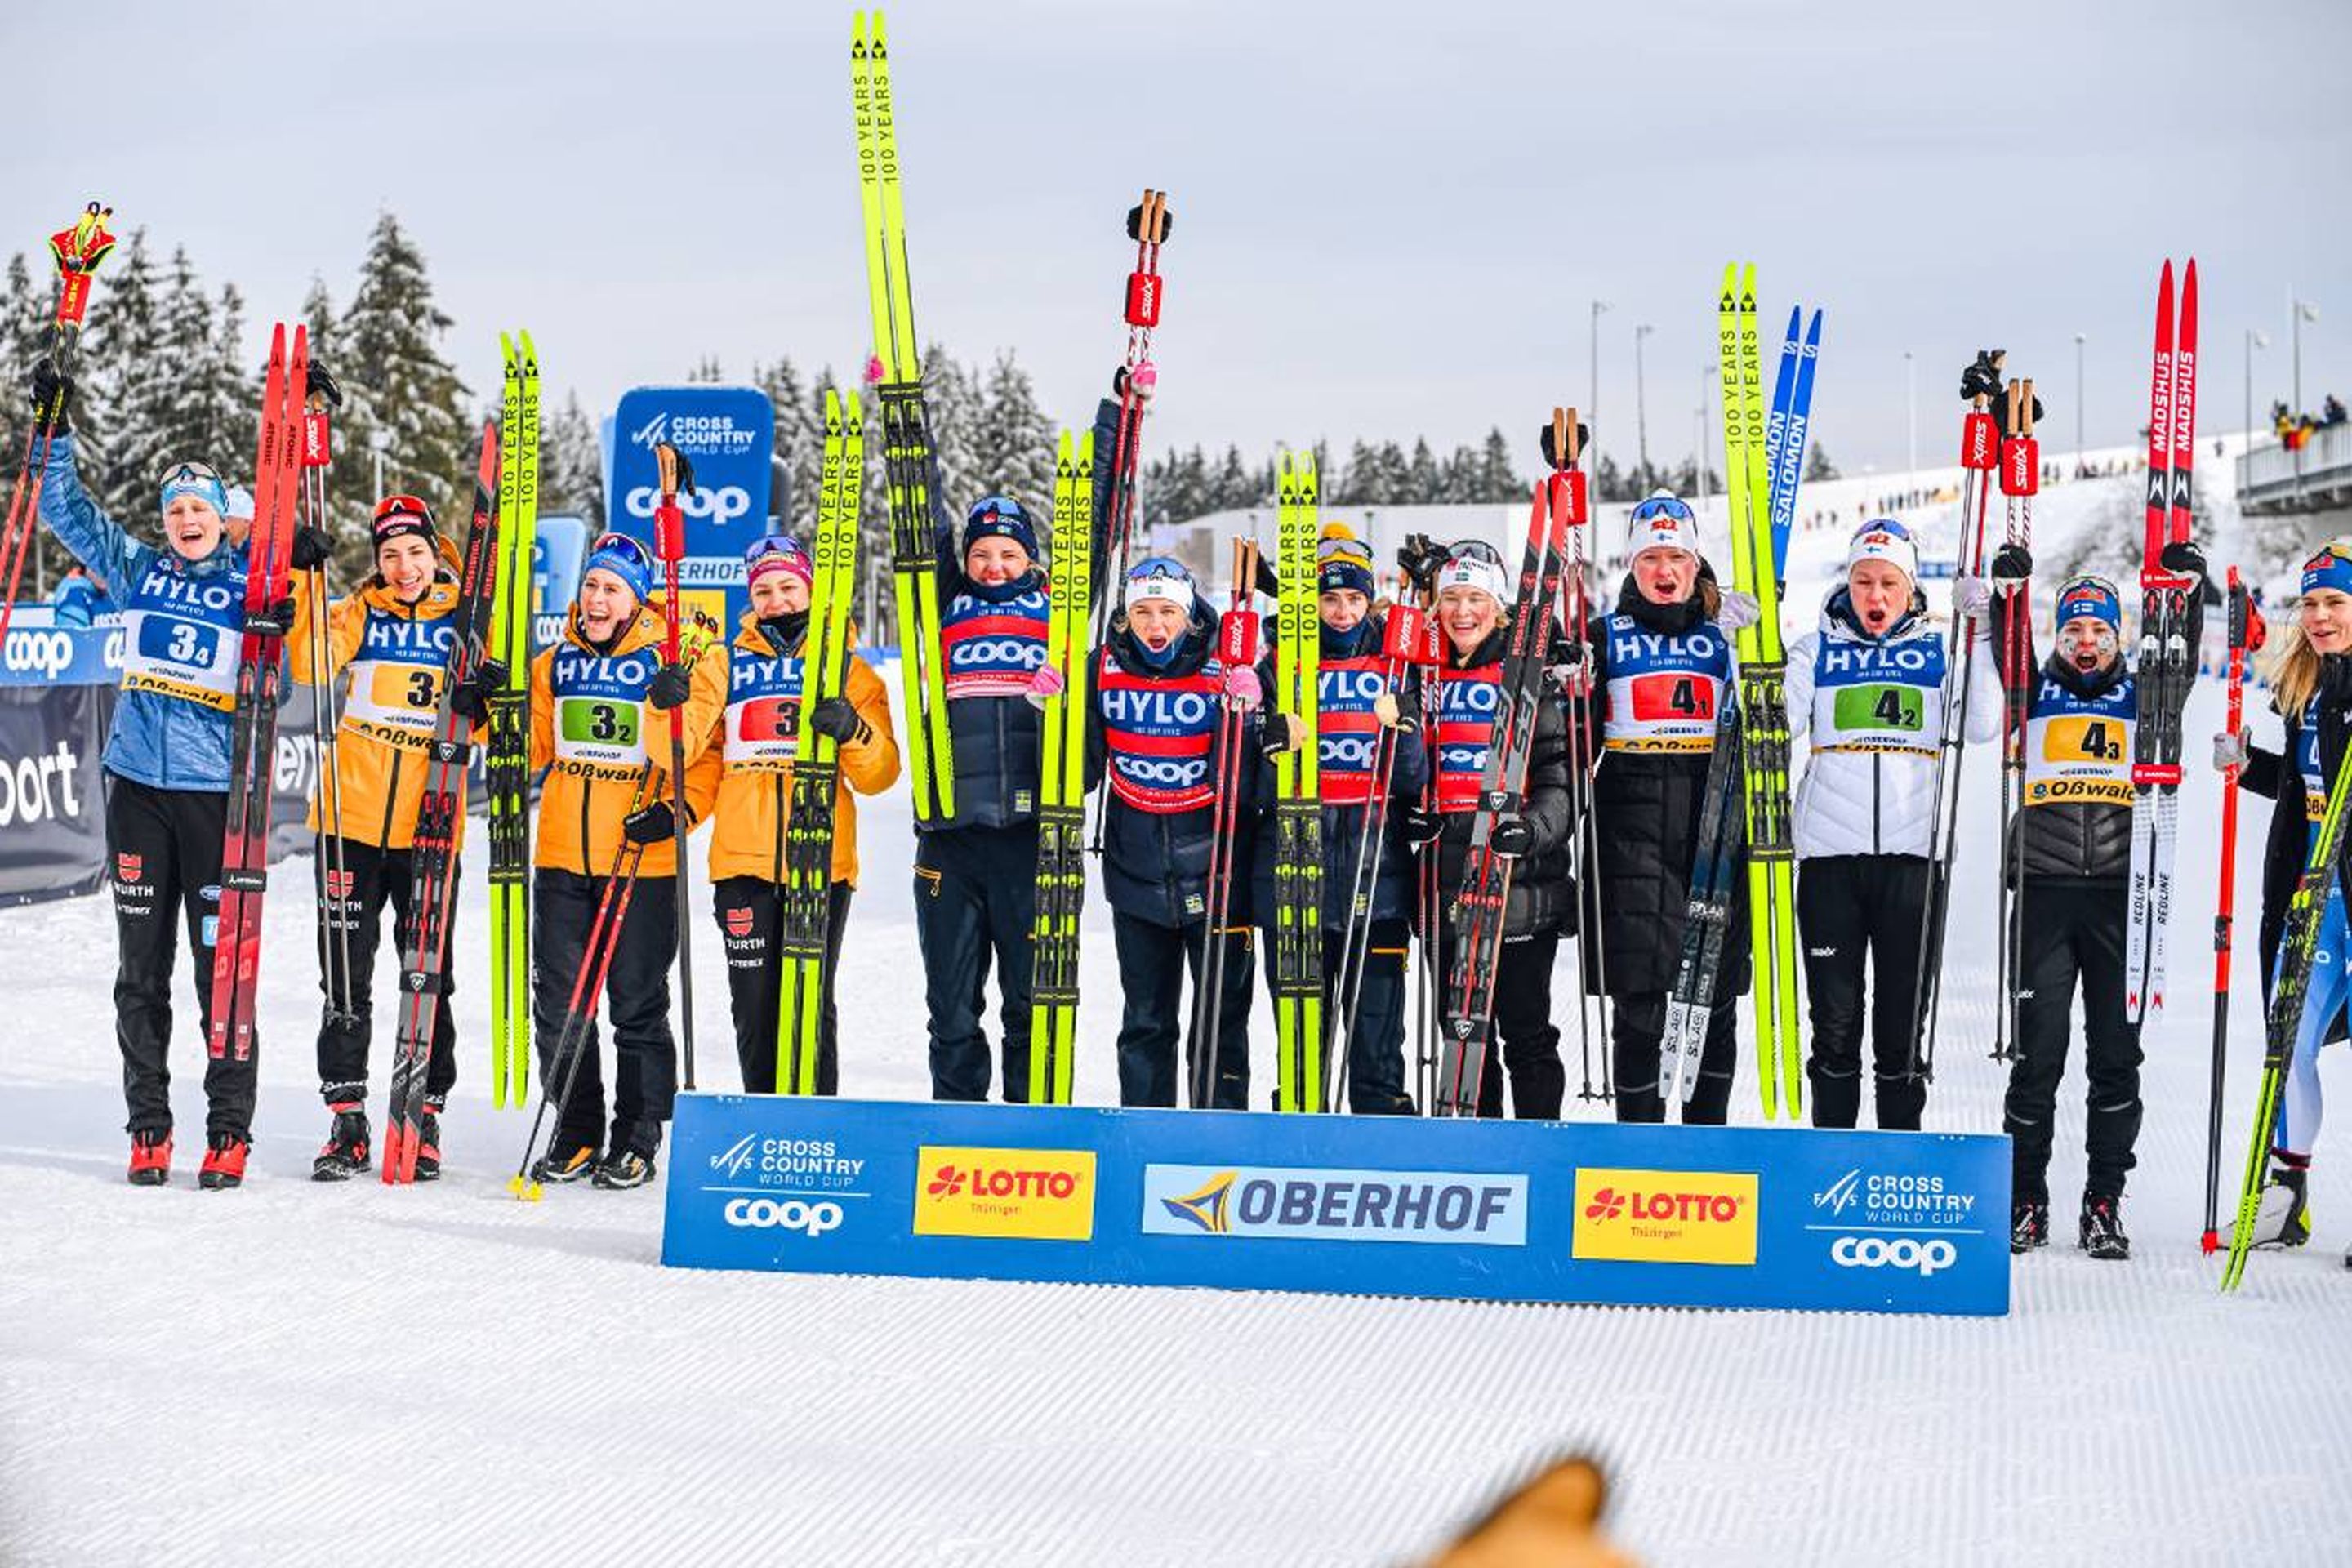 Germany, Sweden and Finland on the relay podium © NordicFocus